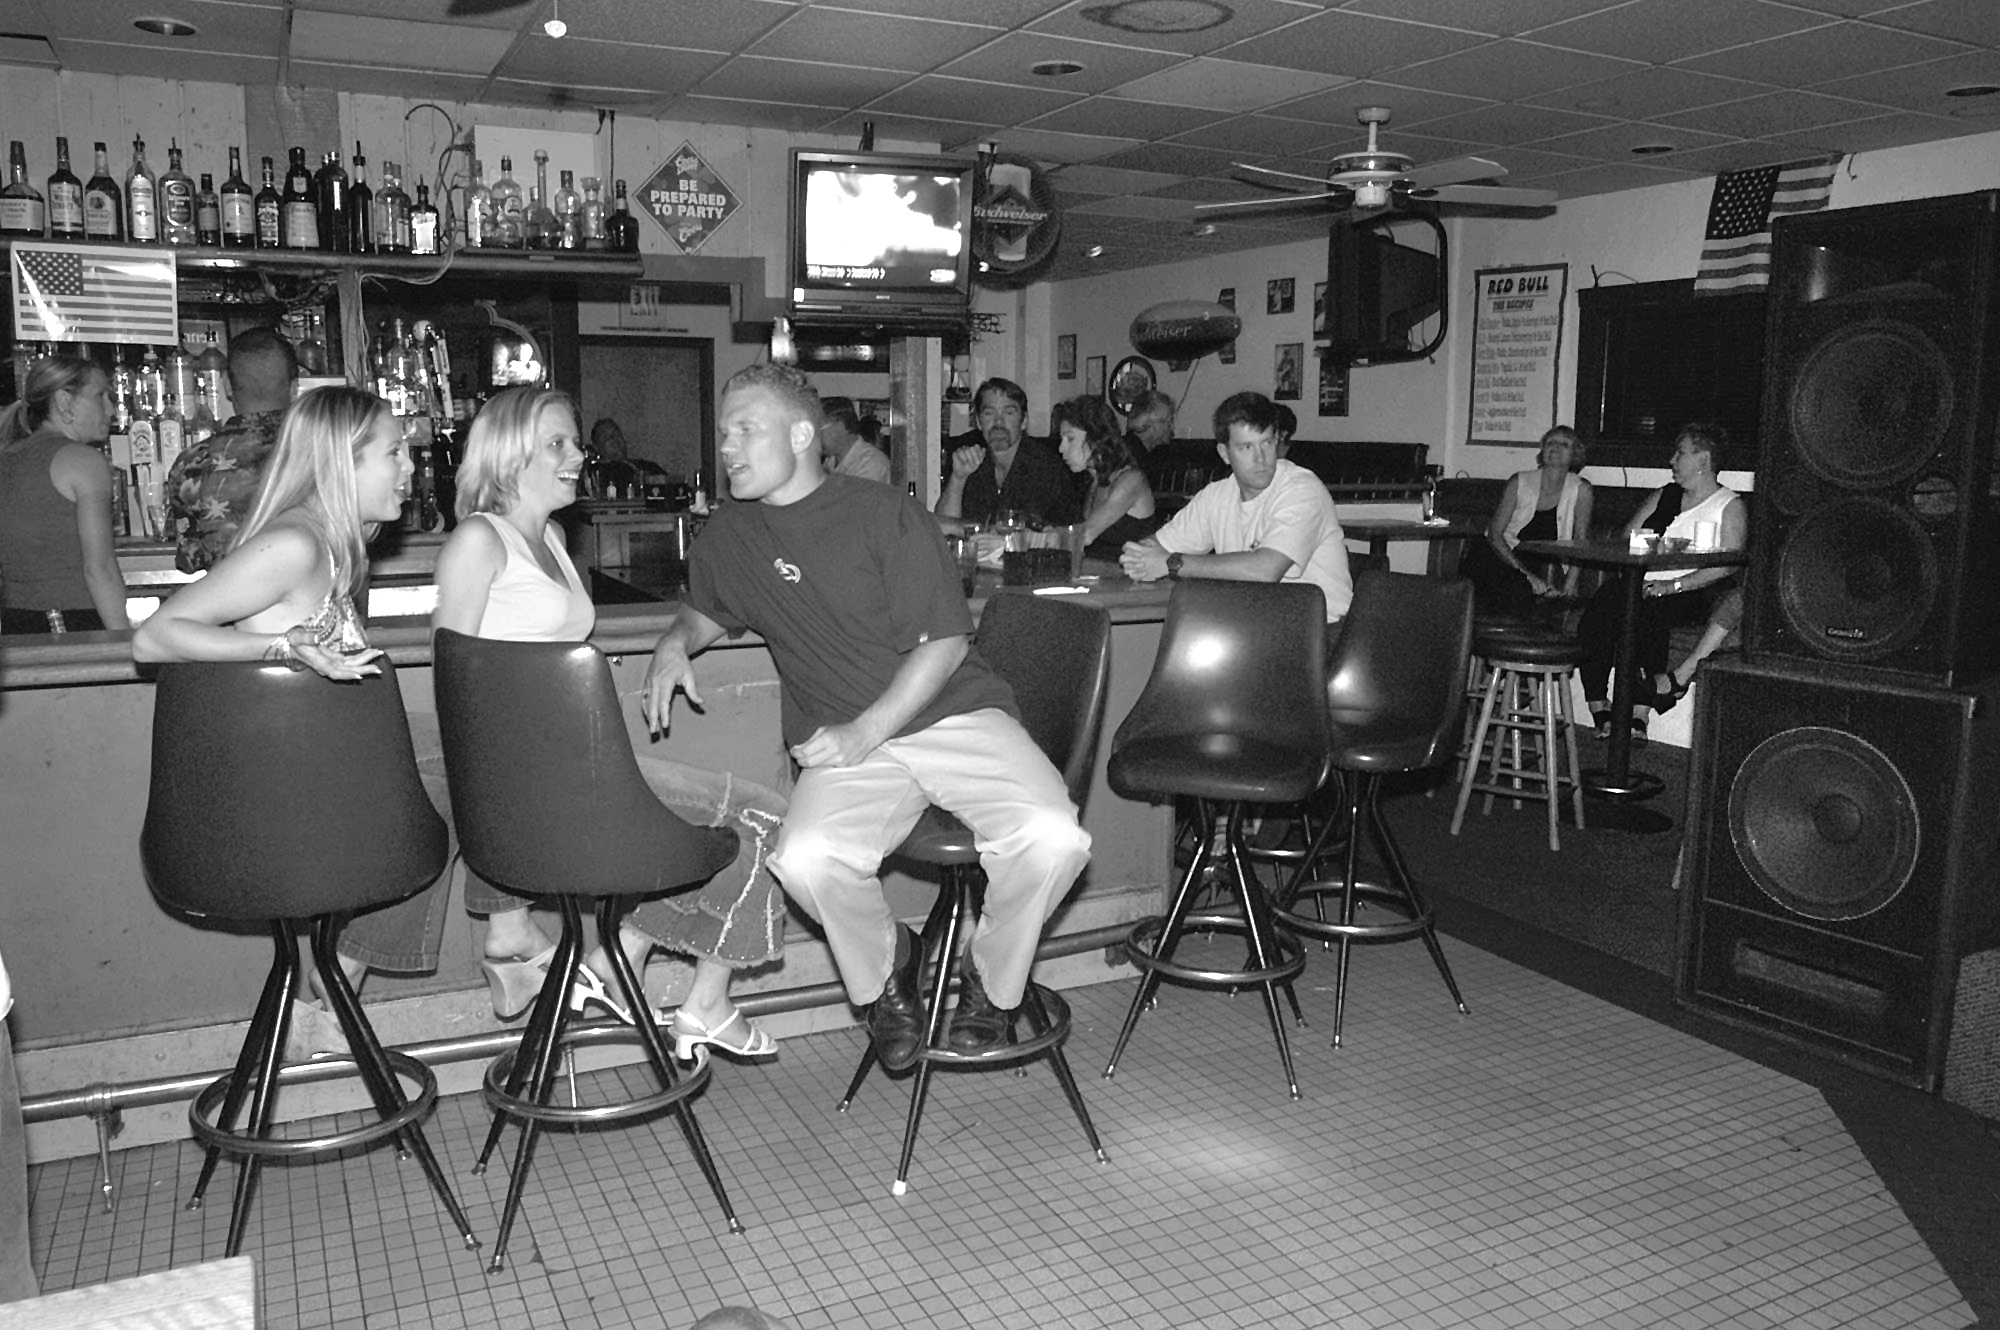 Dads, now Poways famous bar, undergoes media scrutiny San Diego Reader photo picture